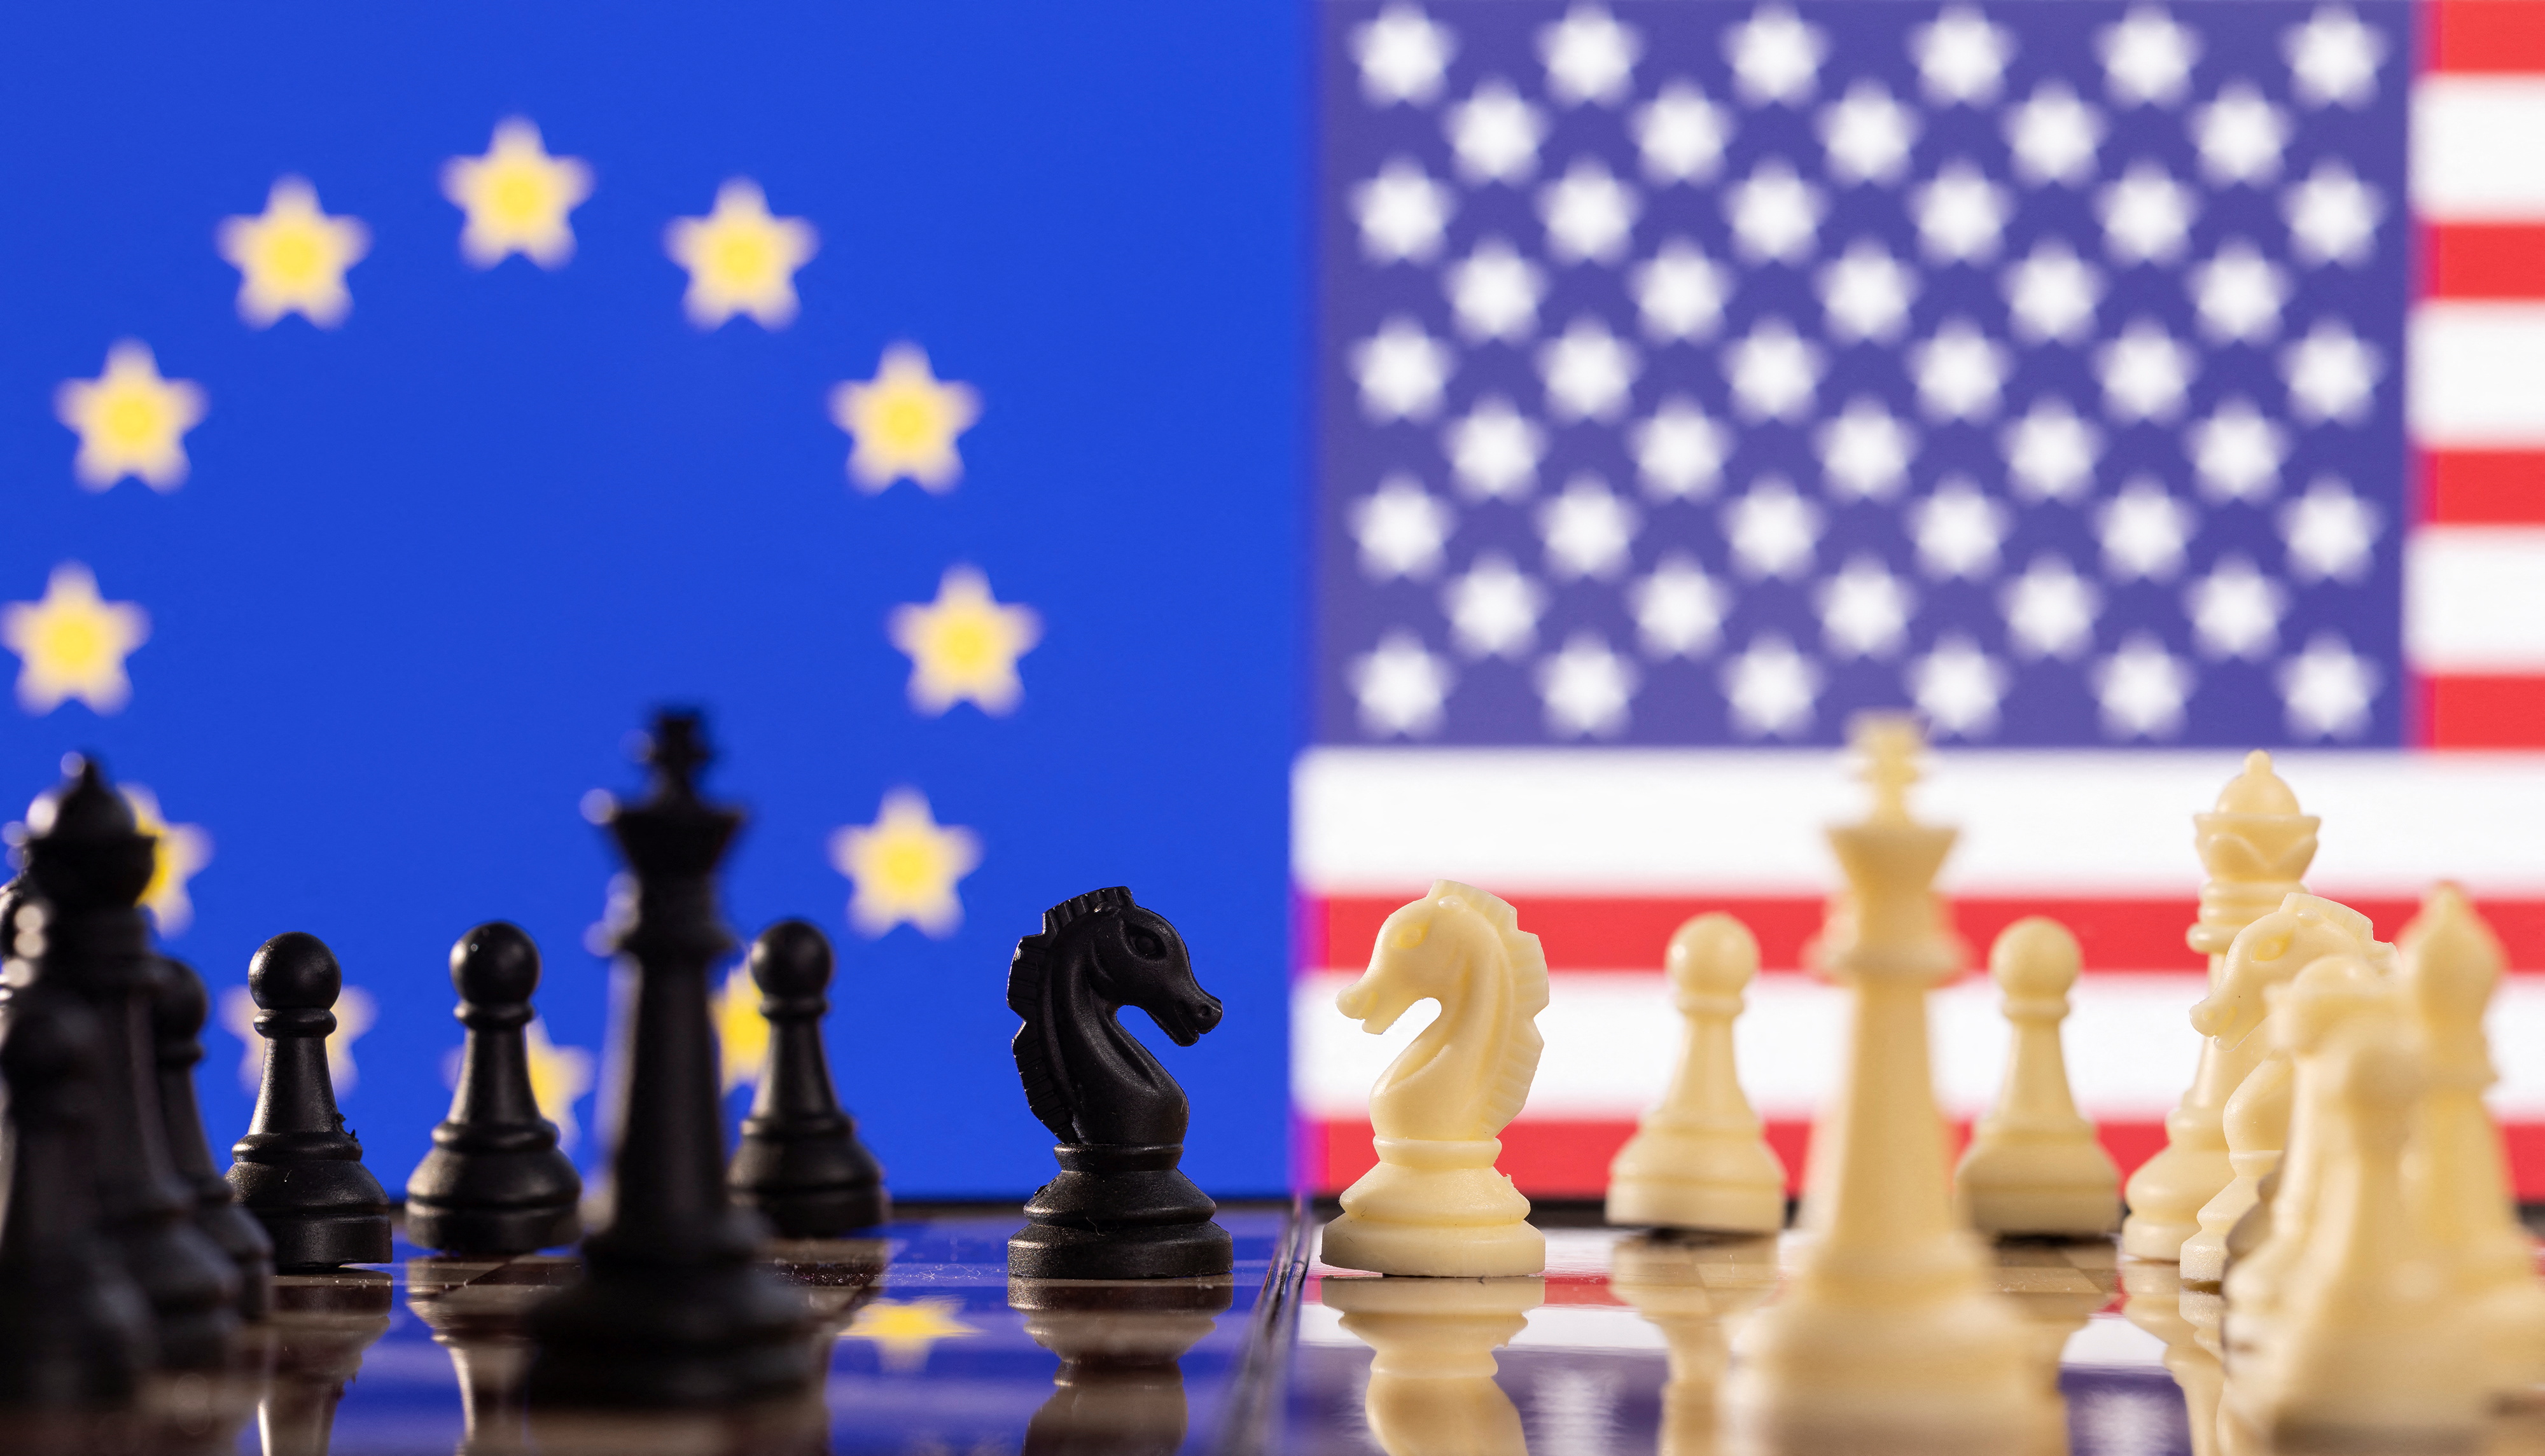 Chess pieces are seen in front of displayed U.S. and EU flags in this illustration taken January 25, 2022. REUTERS/Dado Ruvic/Illustration